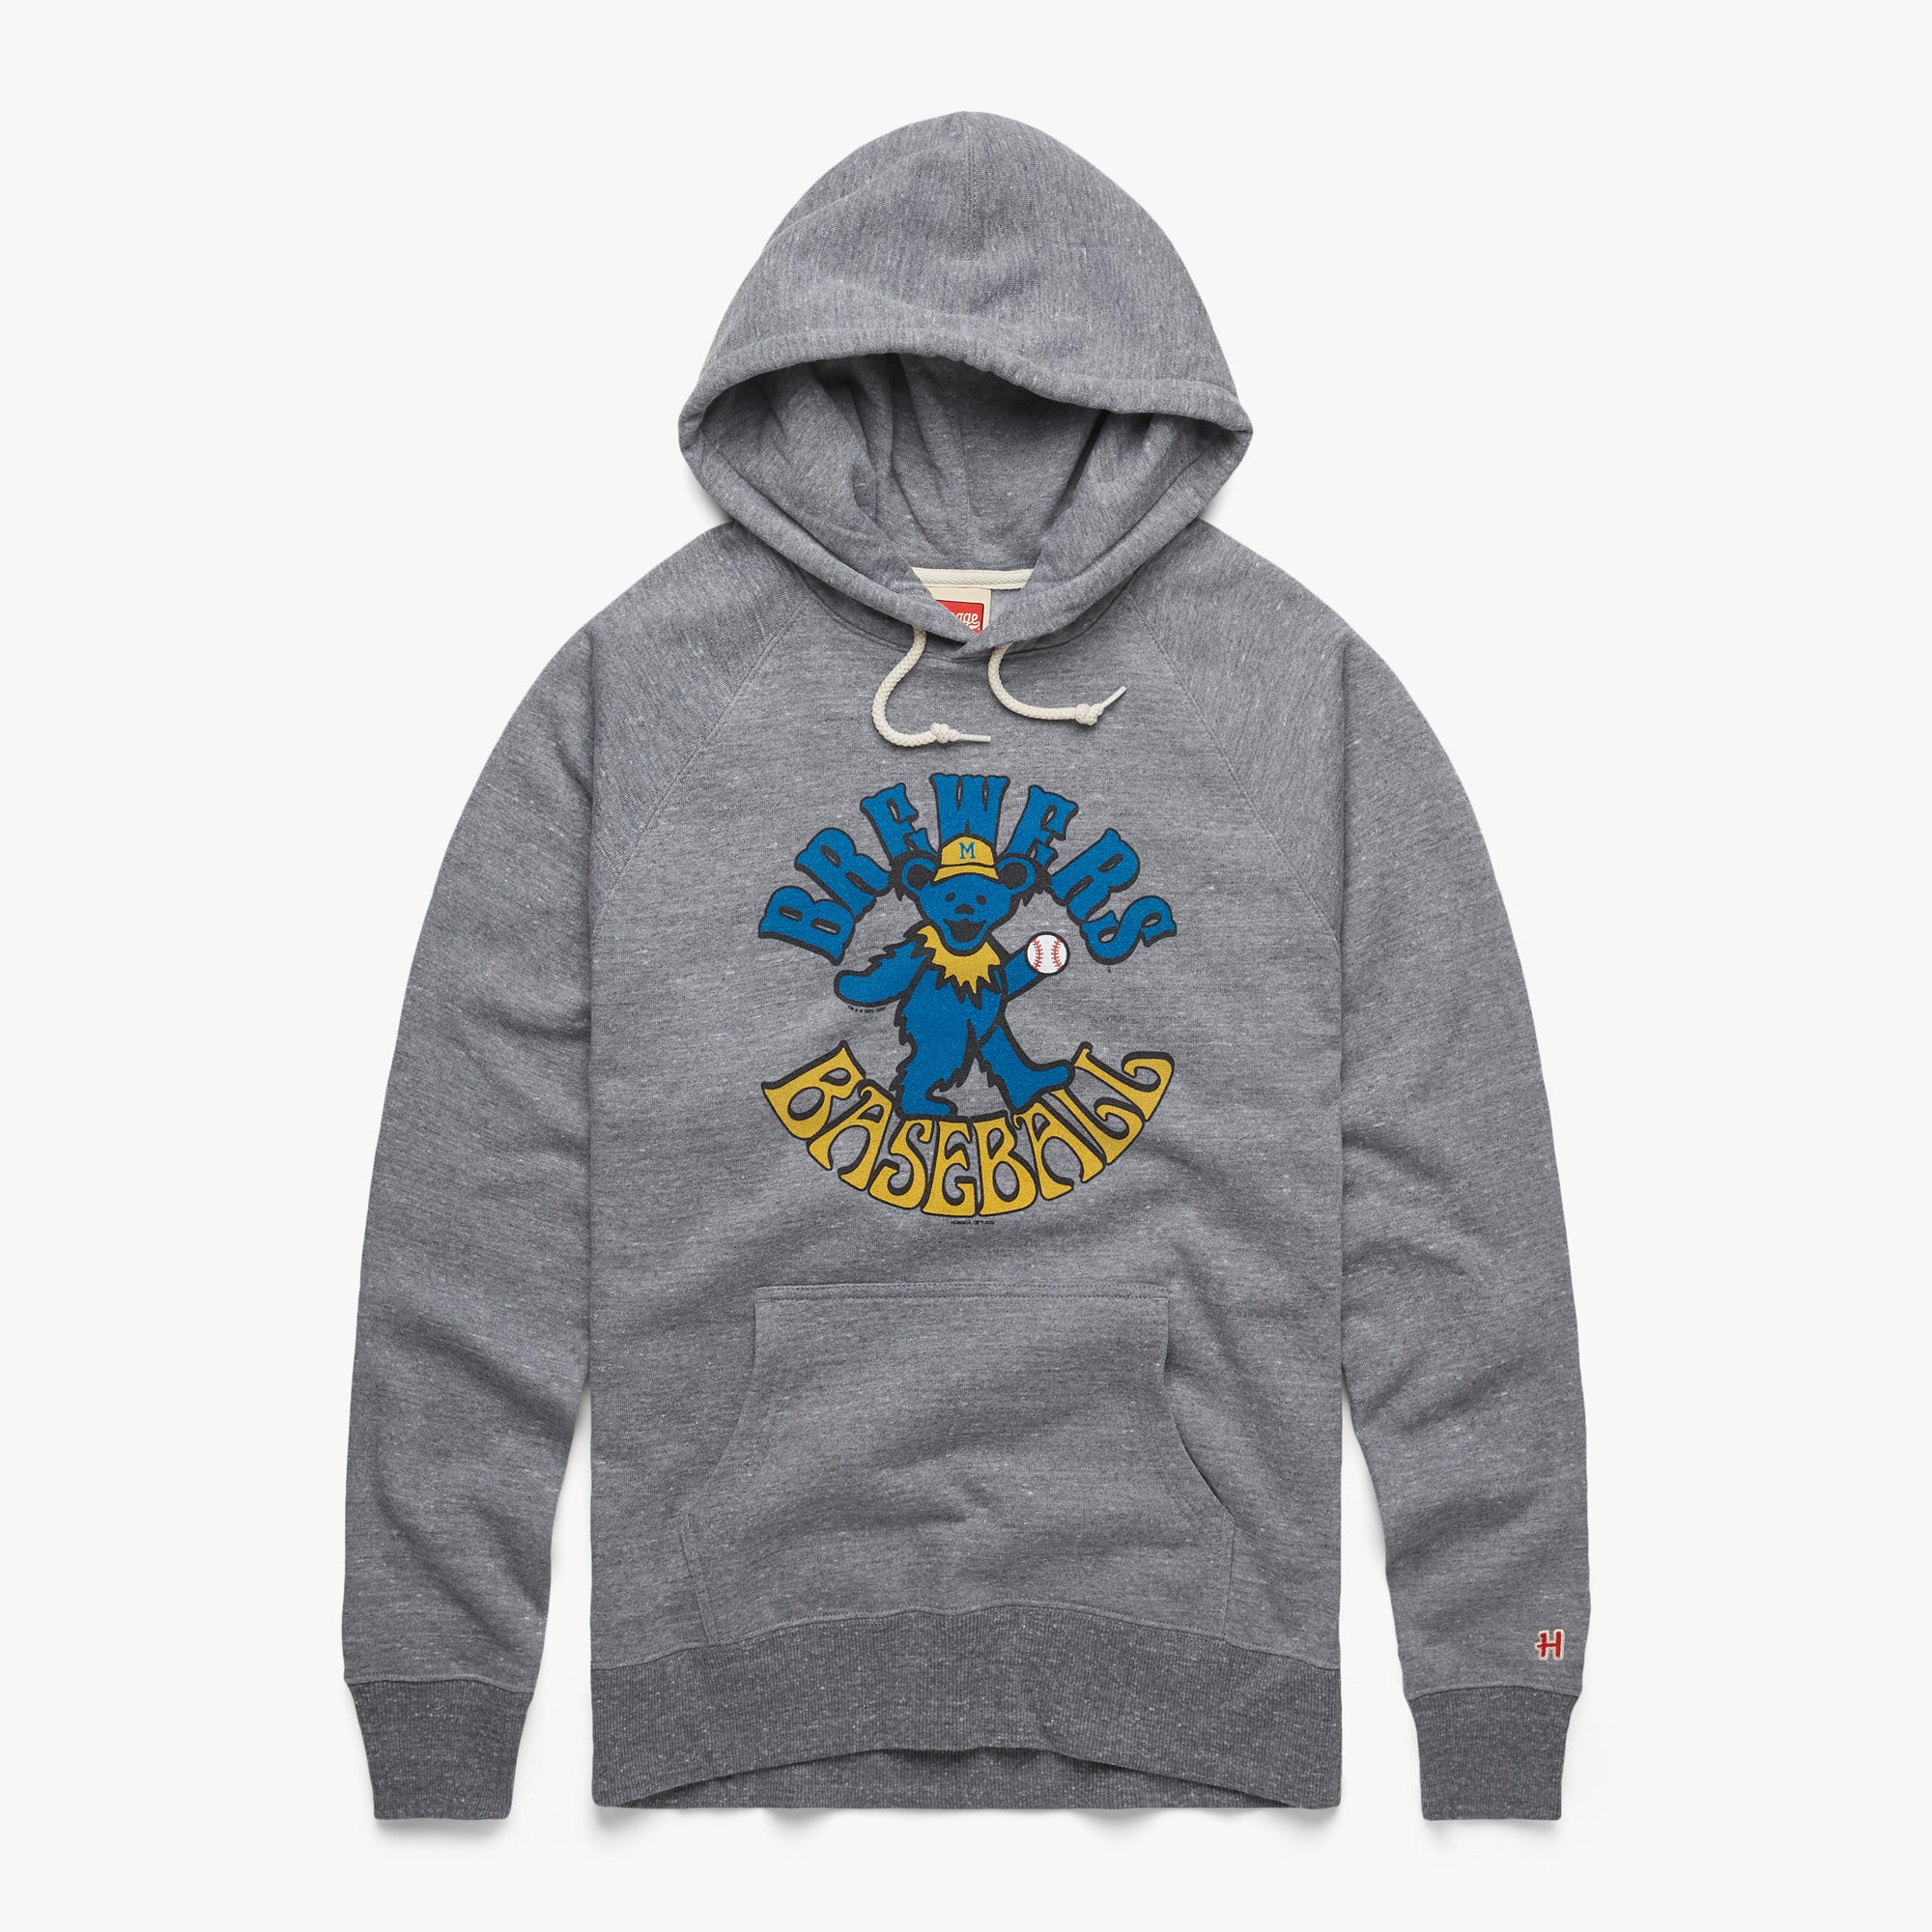 MLB x Grateful Dead x Cardinals Hoodie from Homage. | Red | Vintage Apparel from Homage.